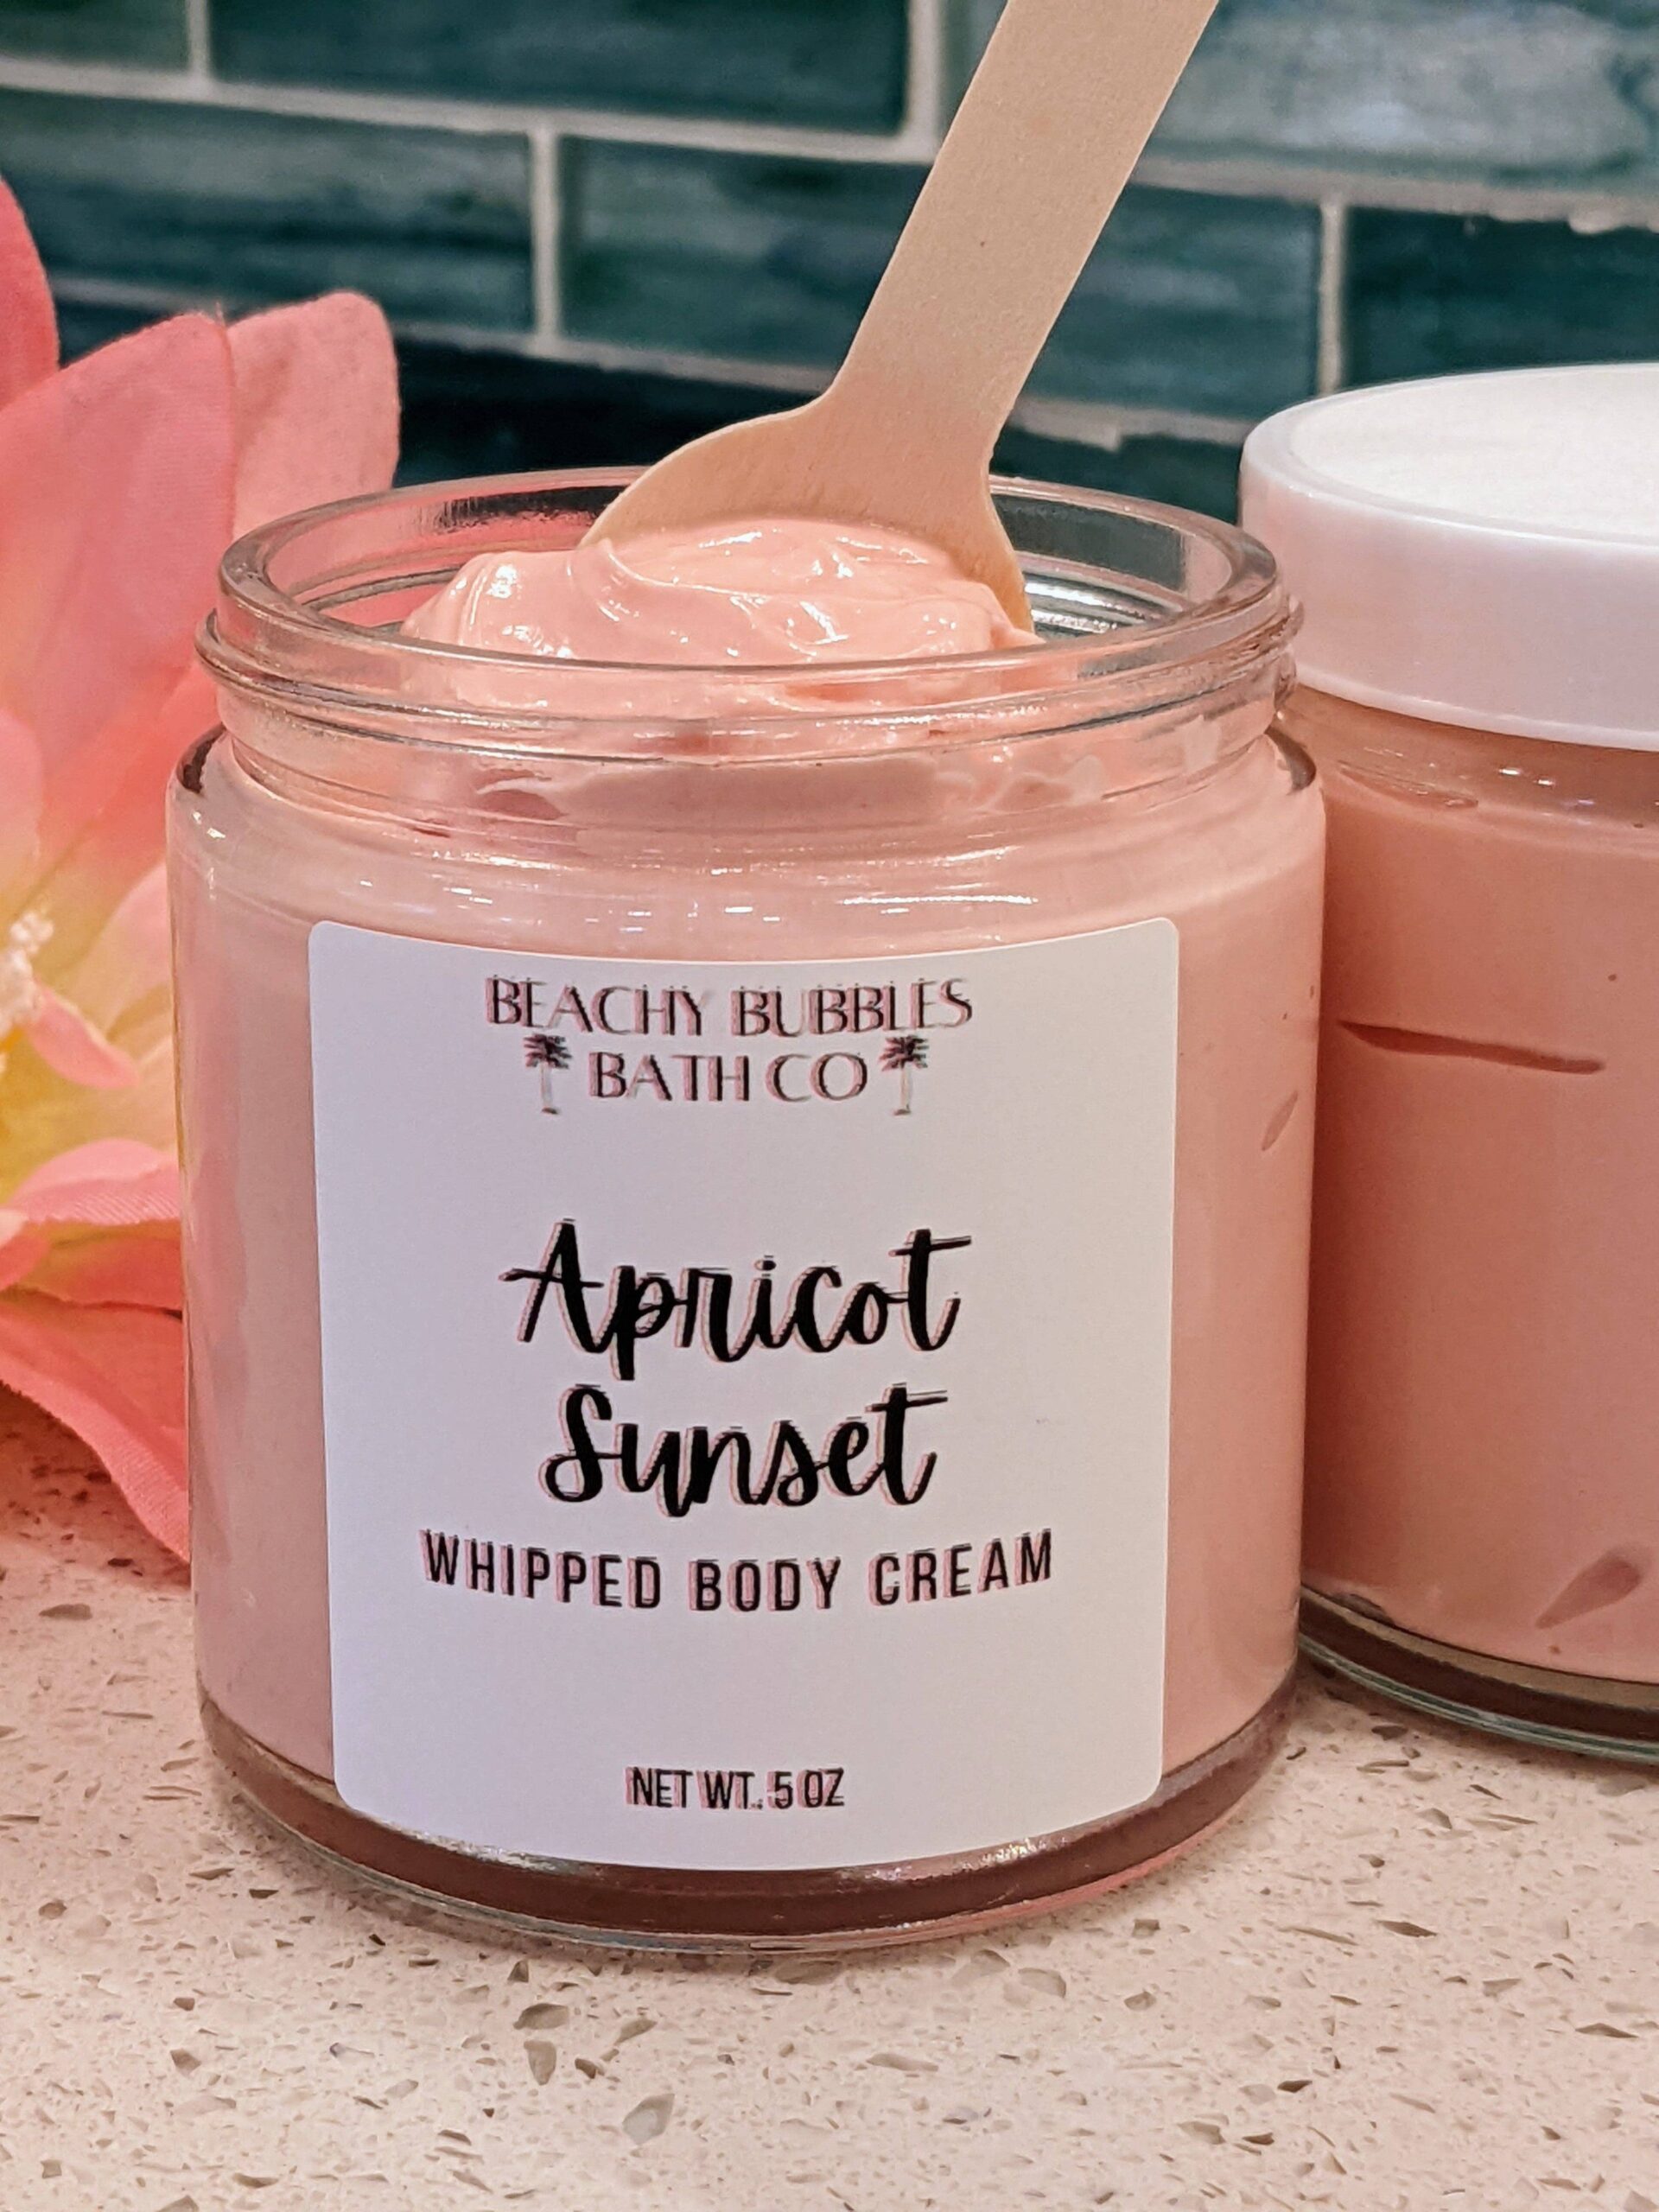 apricot sunset whipped body cream